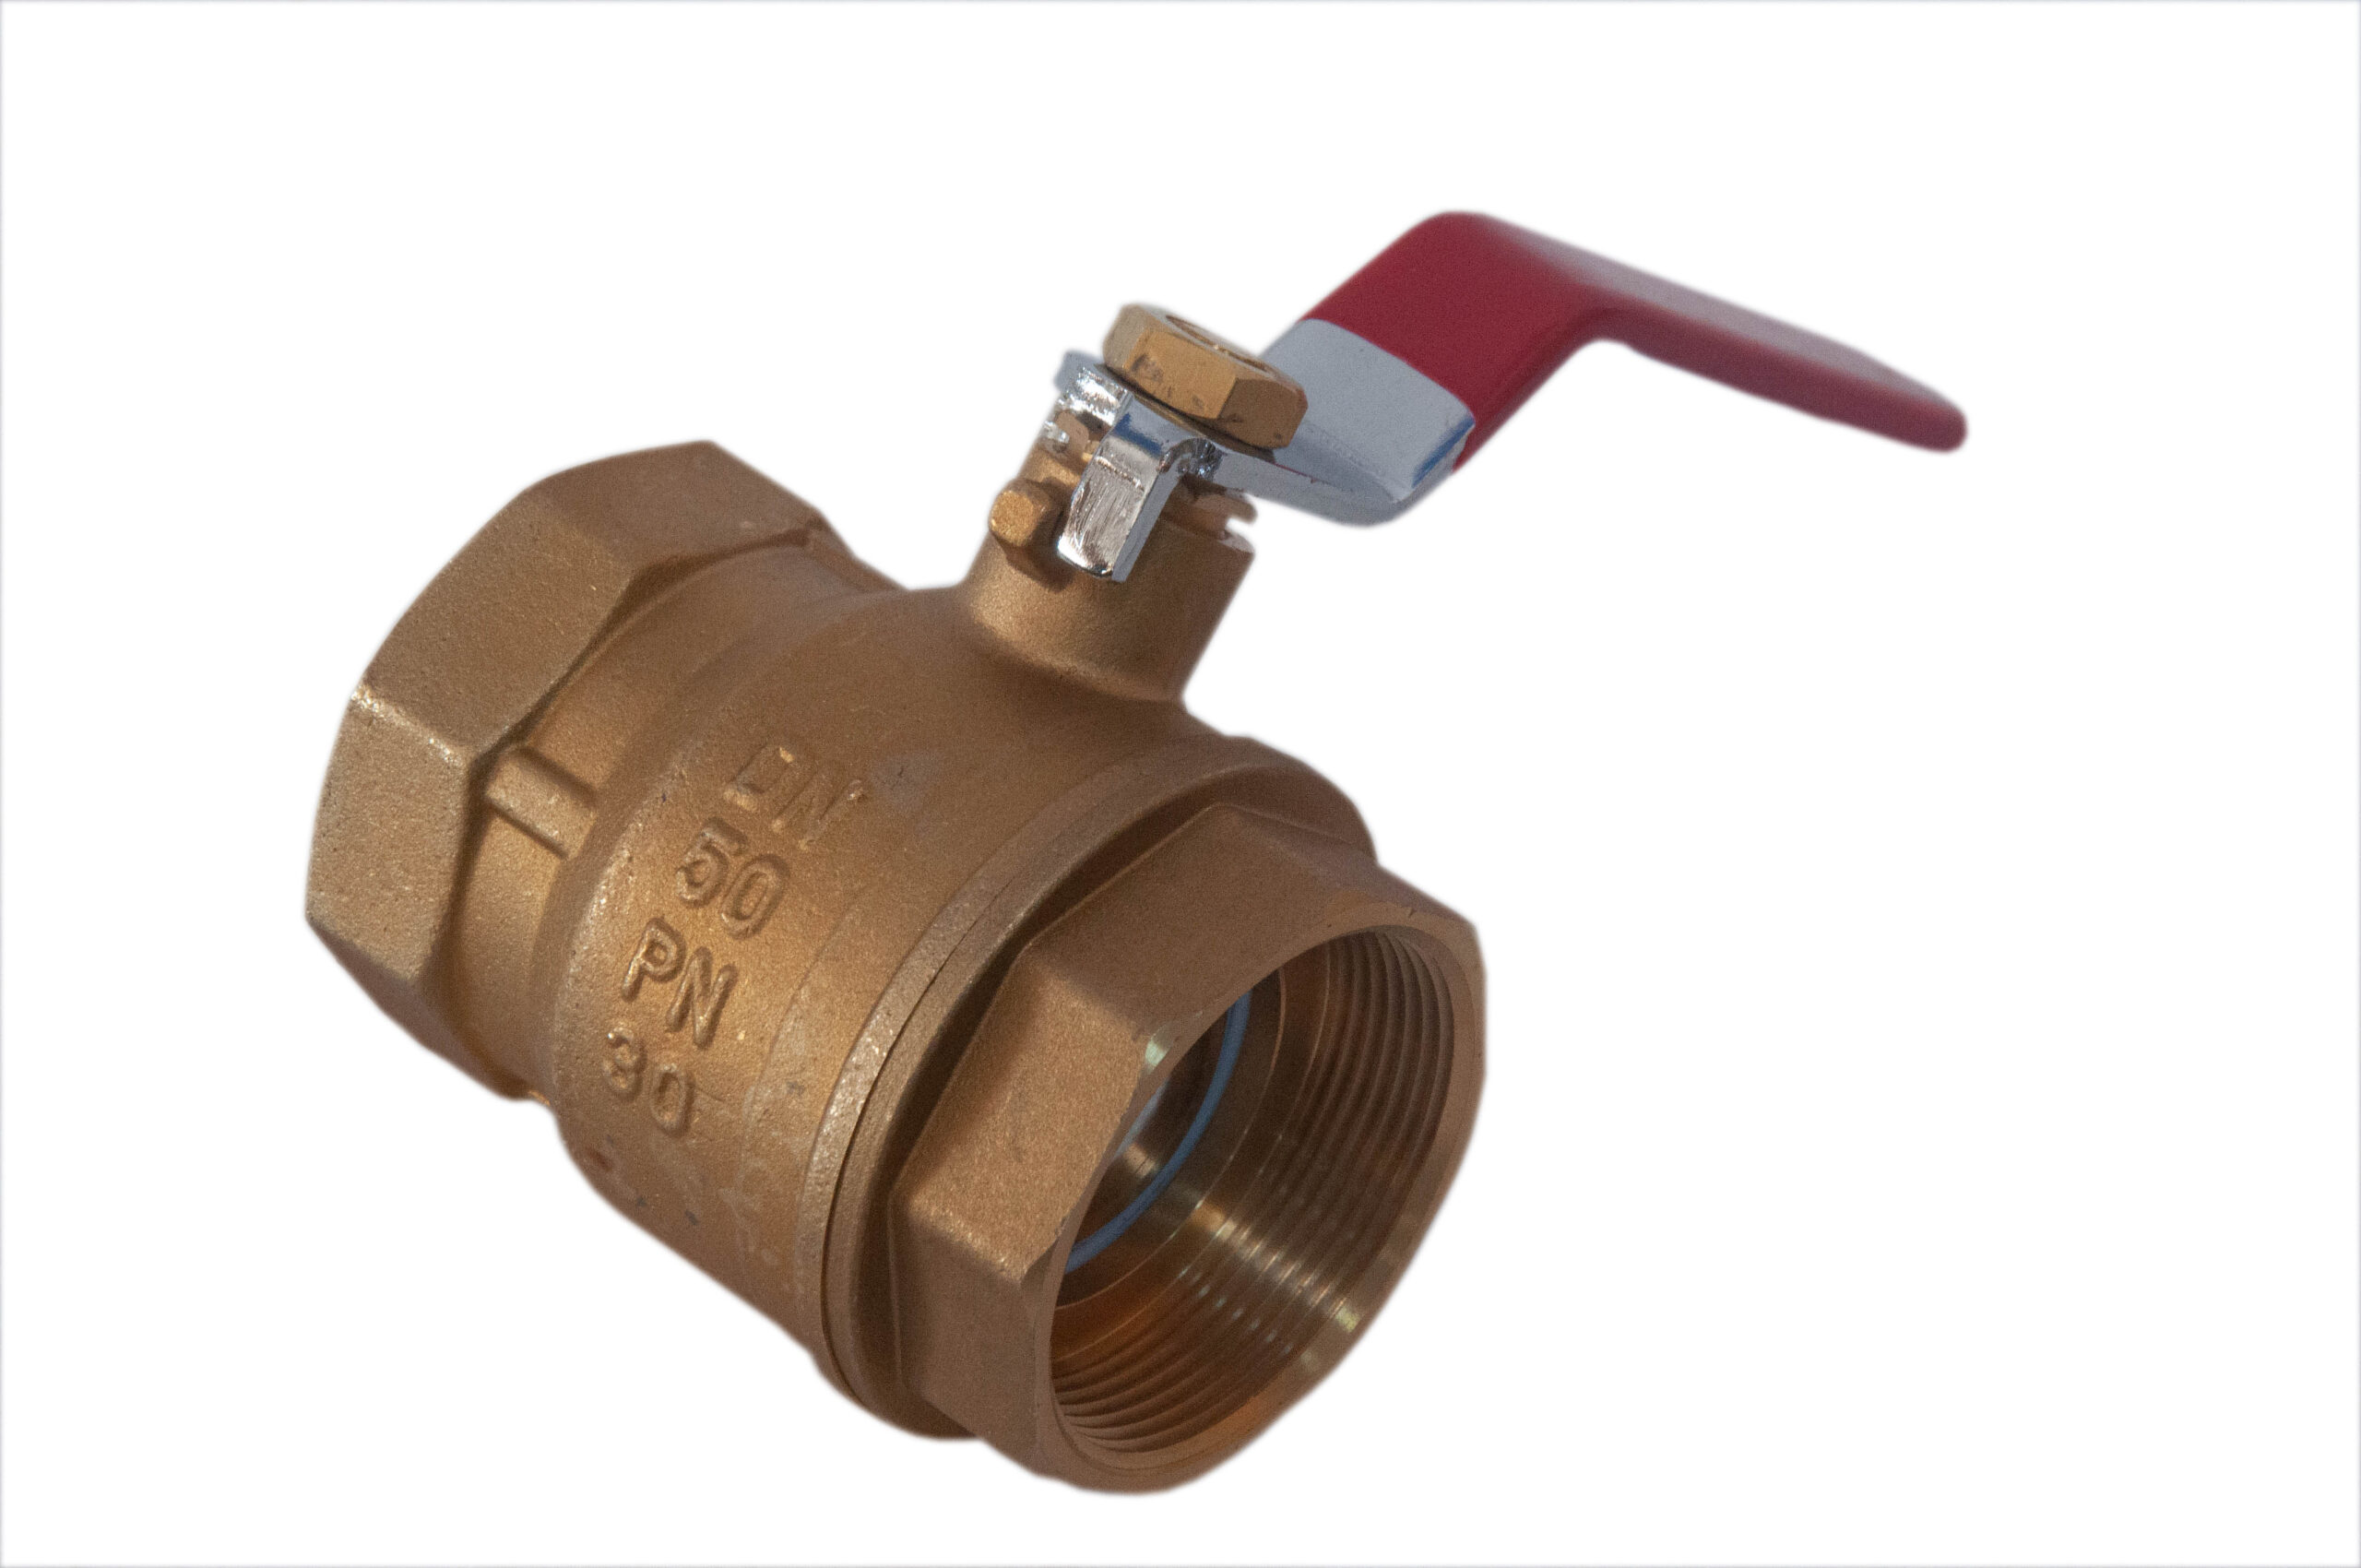 AIRVALVE (2) SIZES; 2 INCHES,1 INCH,3.4INCHES,1-1.2 INCHES,1-1.4INCHES,1.2 INCHES